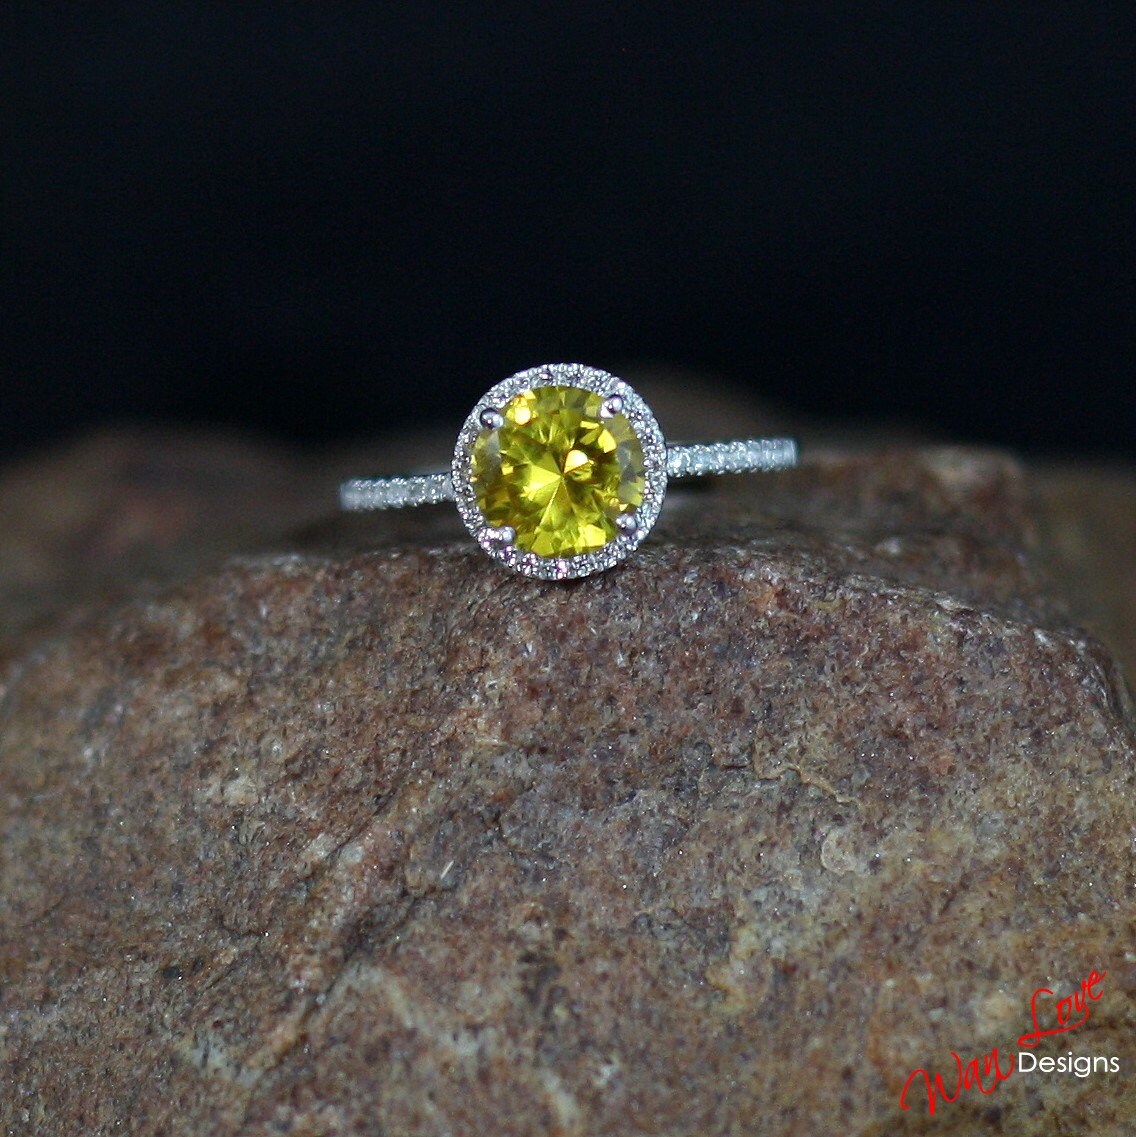 Yellow & White Sapphire Round Halo Engagement Ring, 1 ct, 6mm, Silver Rhodium, Wedding, Anniversary Gift, Proposal, Ready to ship